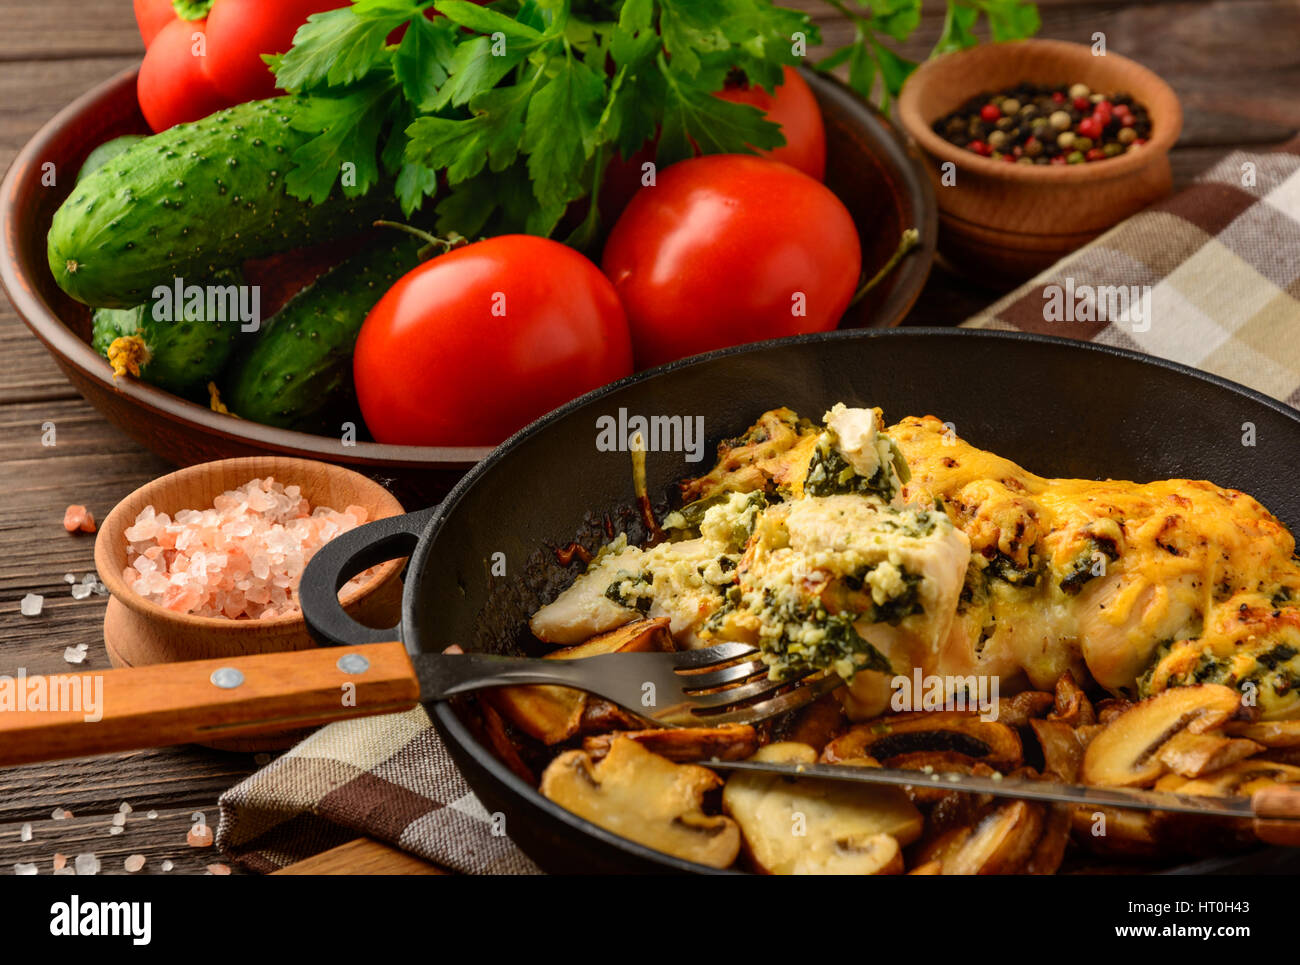 Baked chicken breast stuffed with spinach and cheese with vegetables on a dark background of a wooden table. Stock Photo